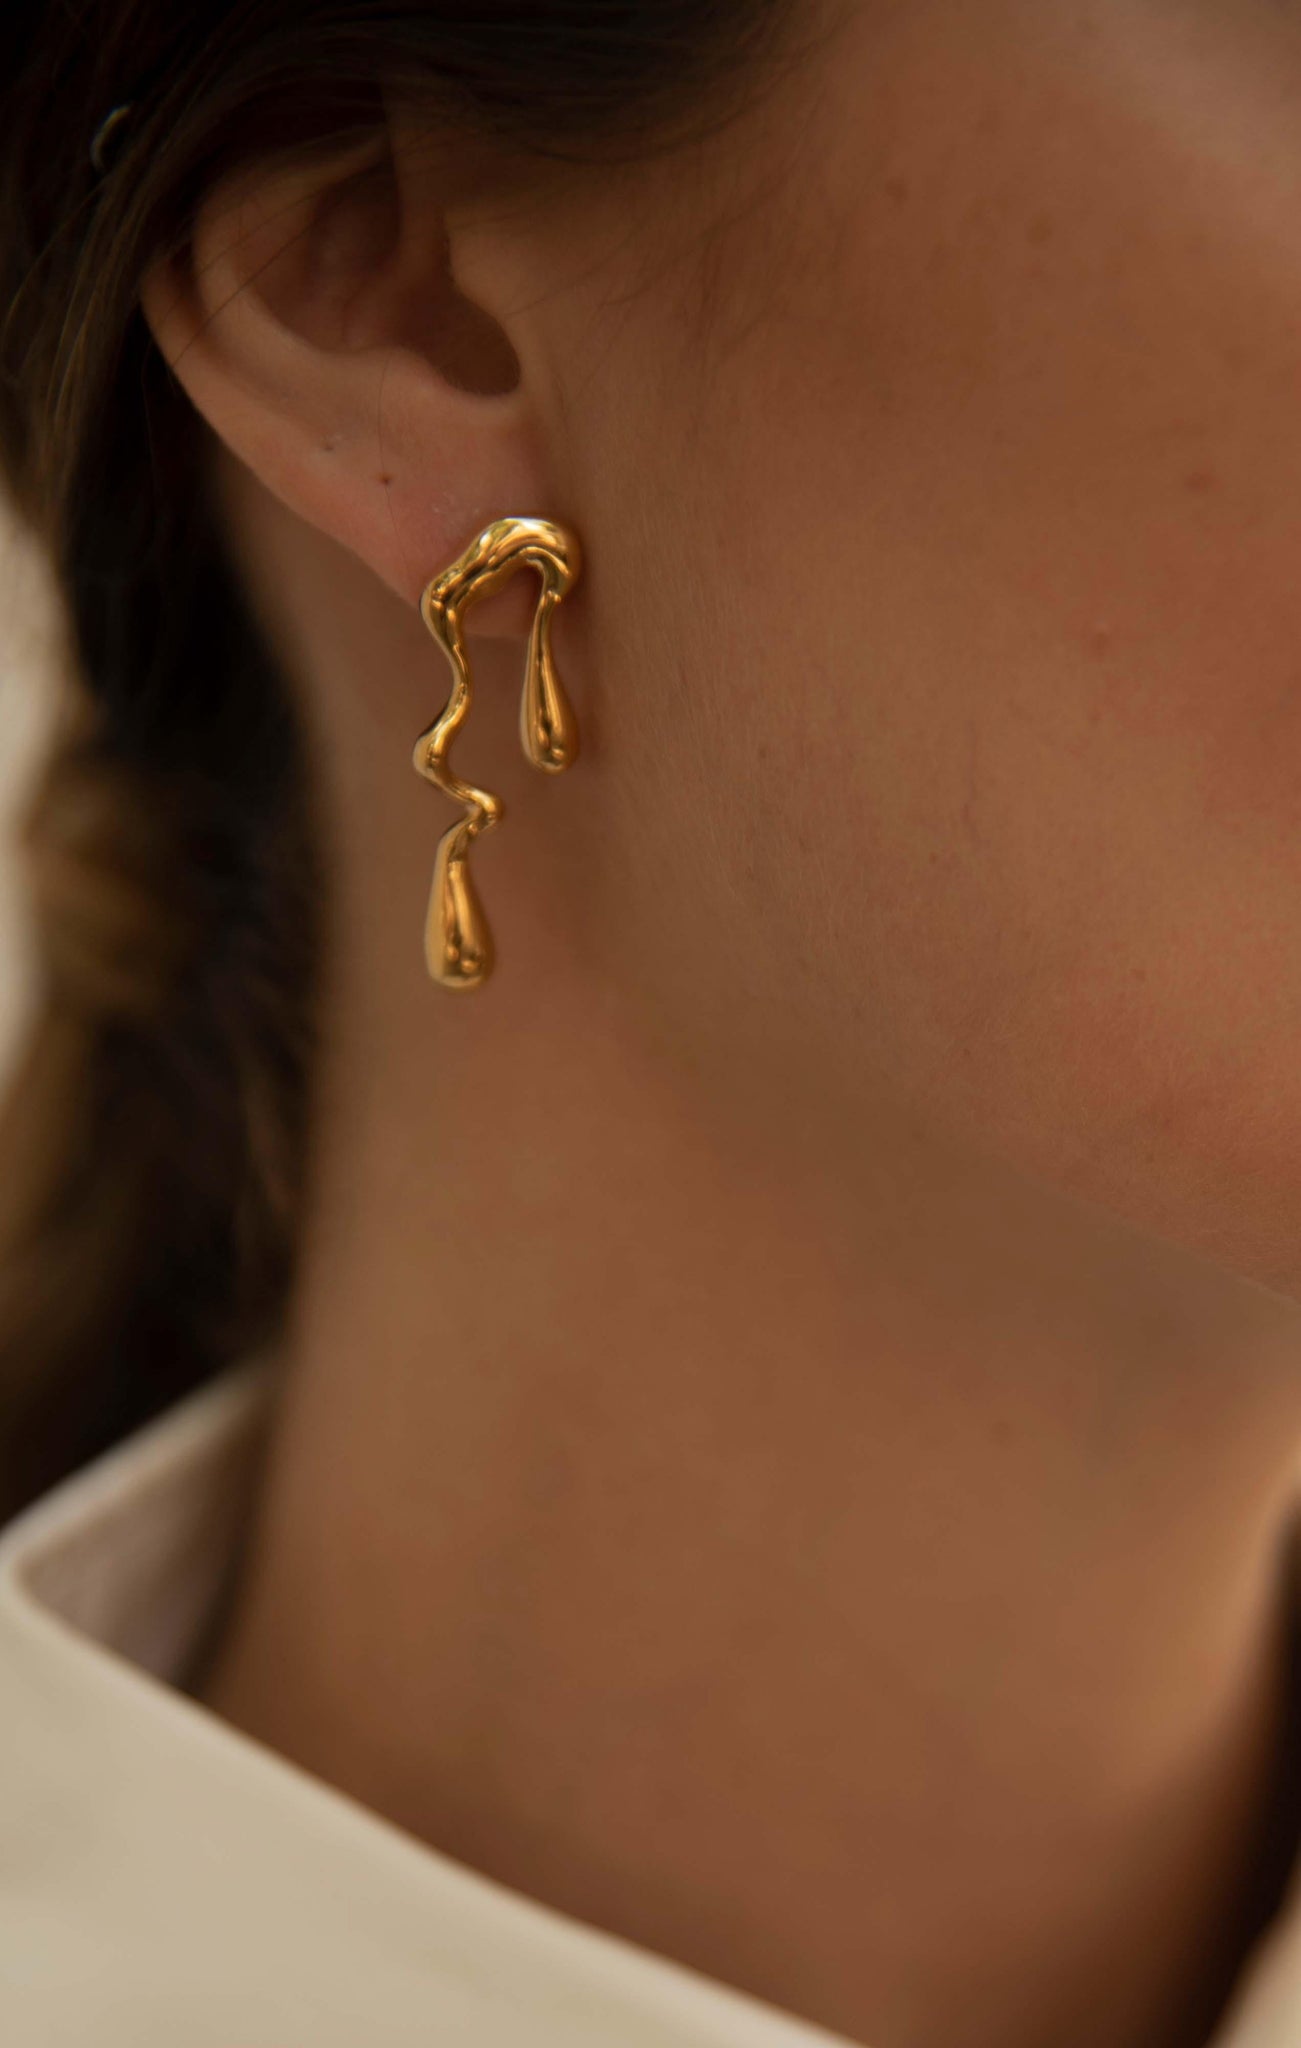 Briella Melted Gold Stud Earrings - Skin and Threads